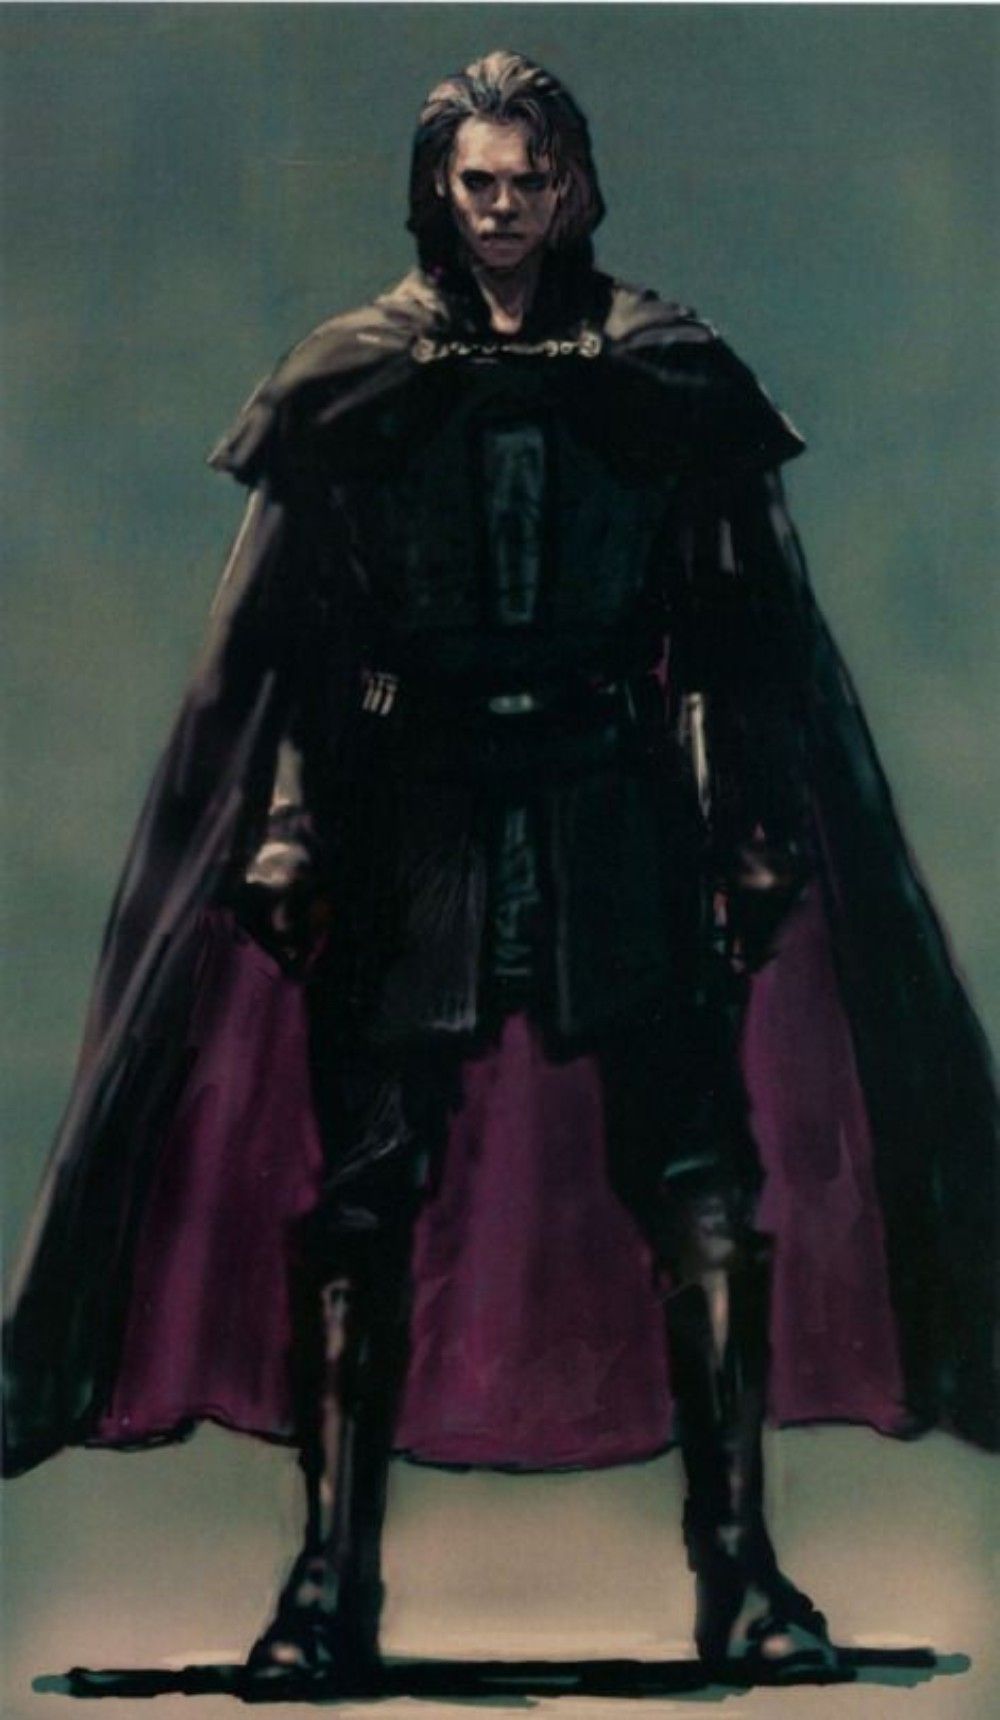 Star Wars 10 Incredible Pieces of Sith Lord Concept Art We Love